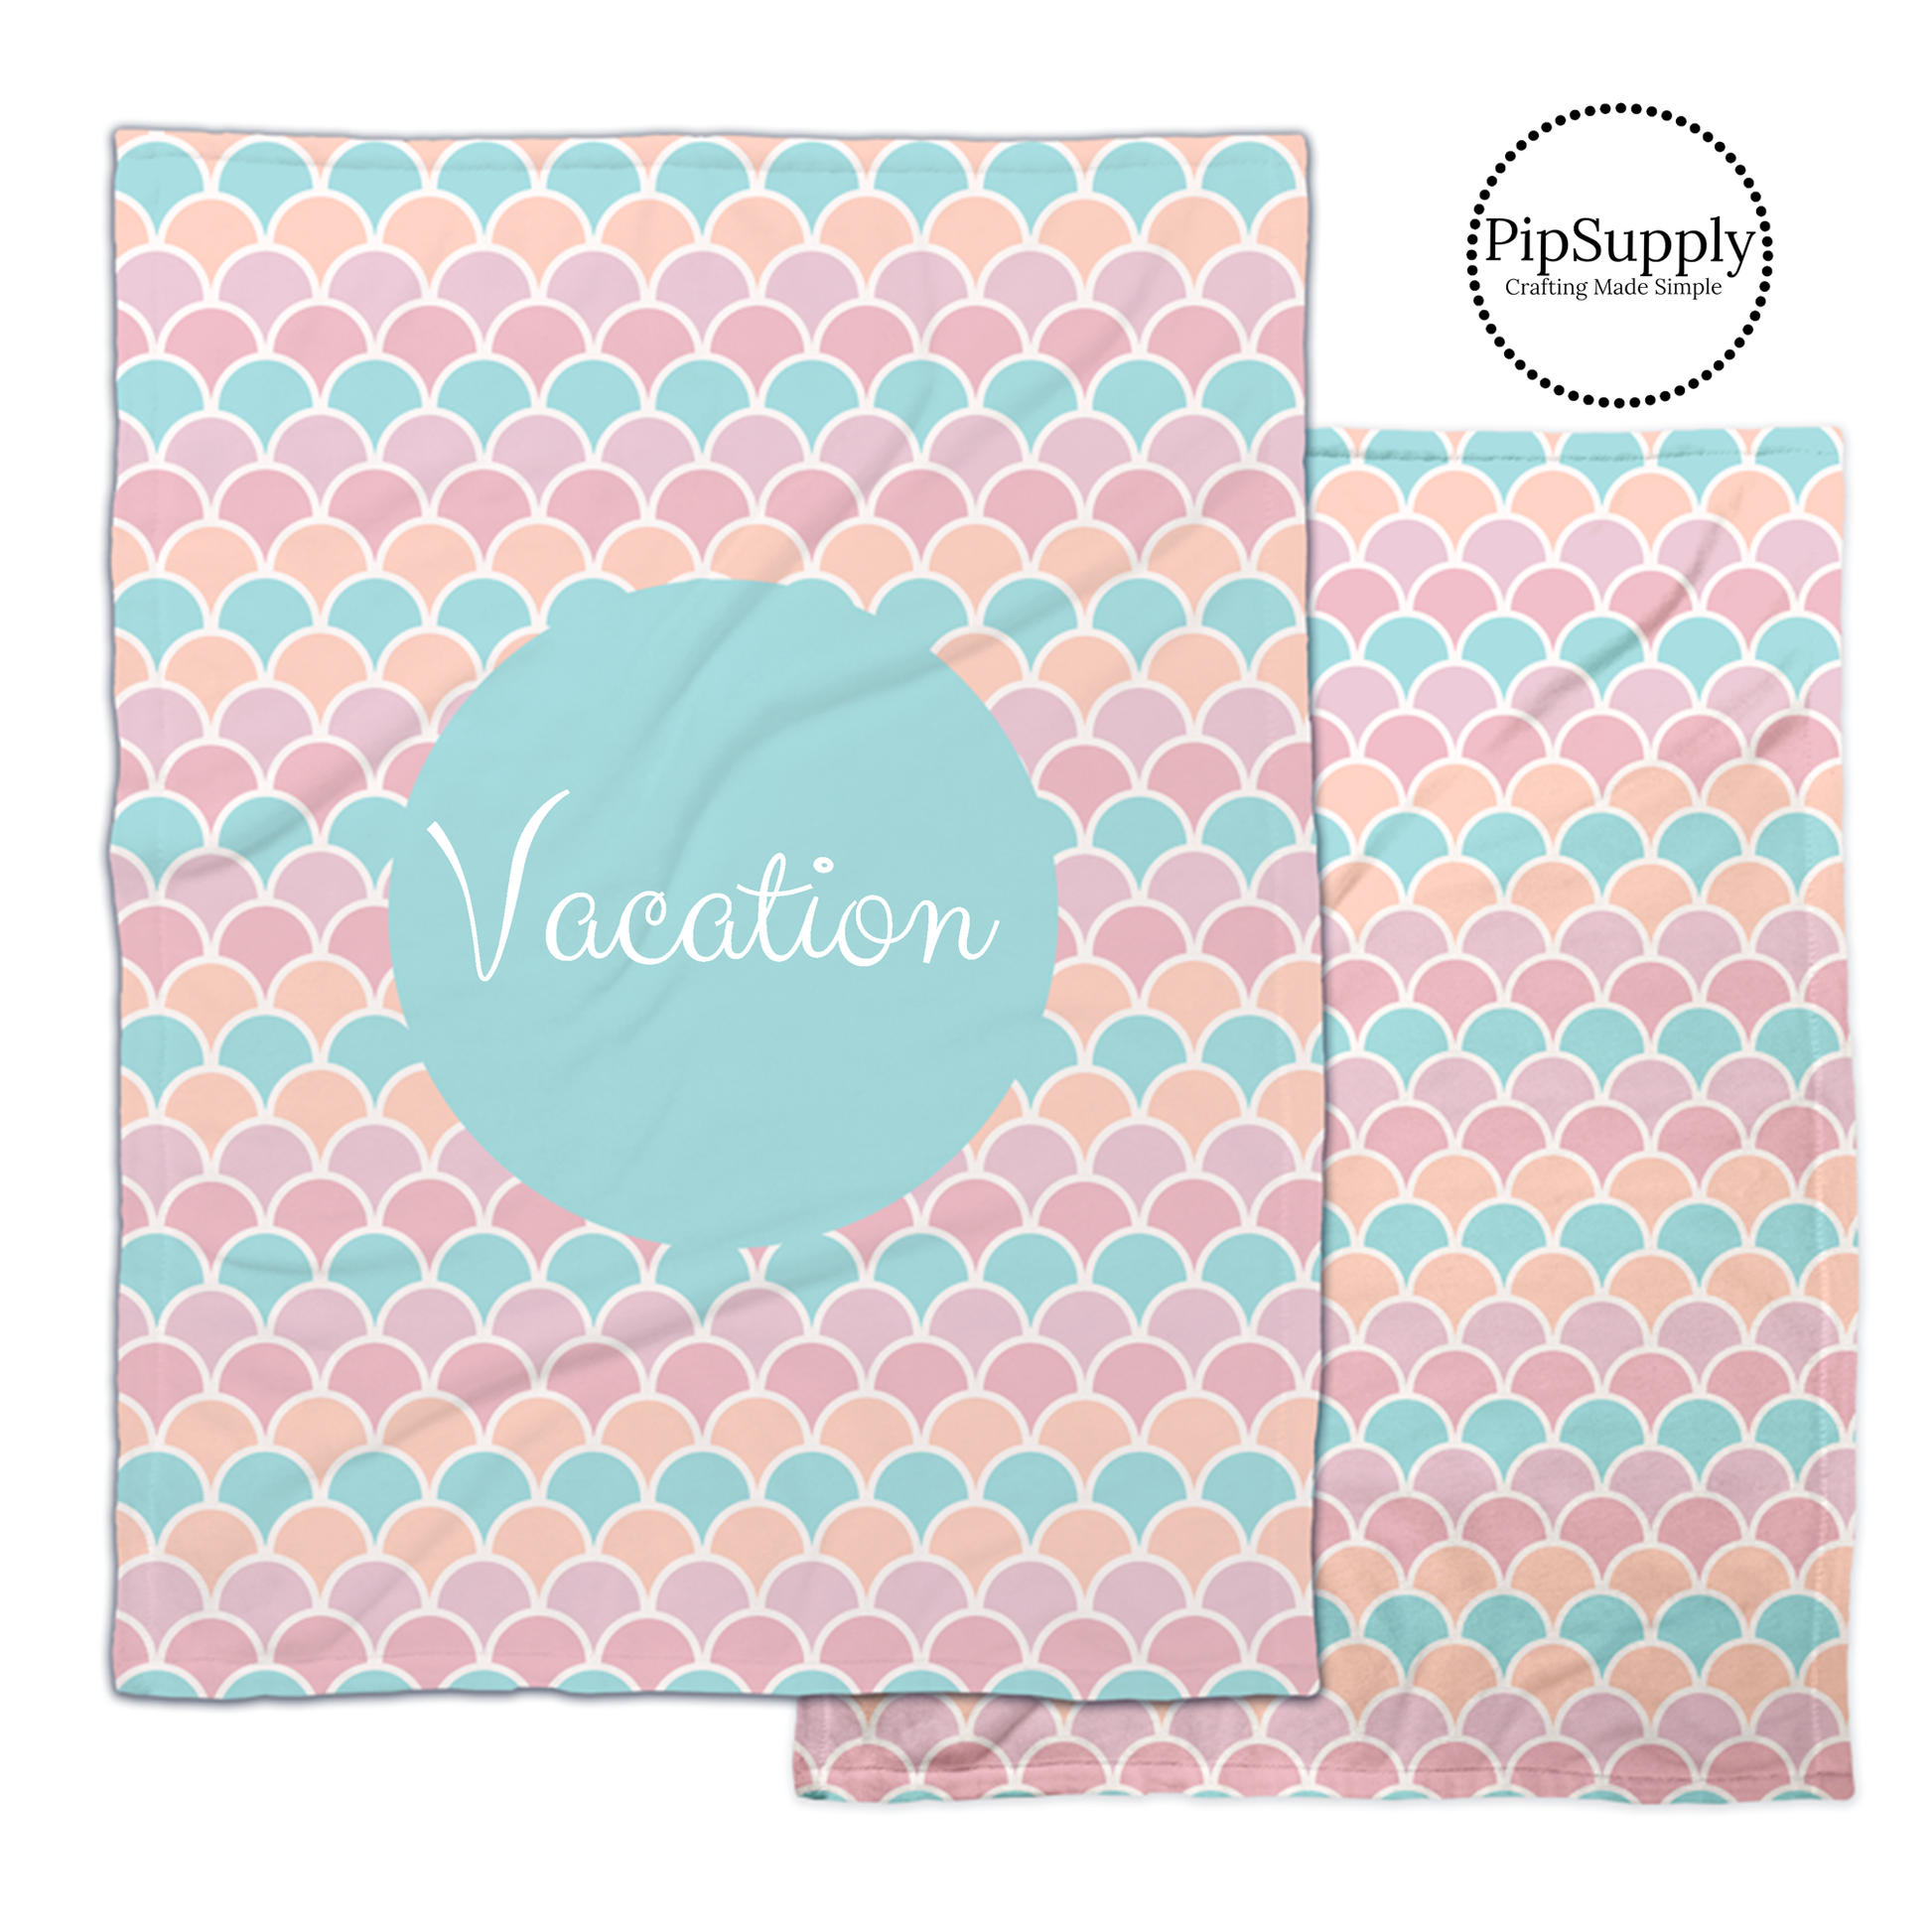 Pastel summer mermaid scales print blanket with customizable text.